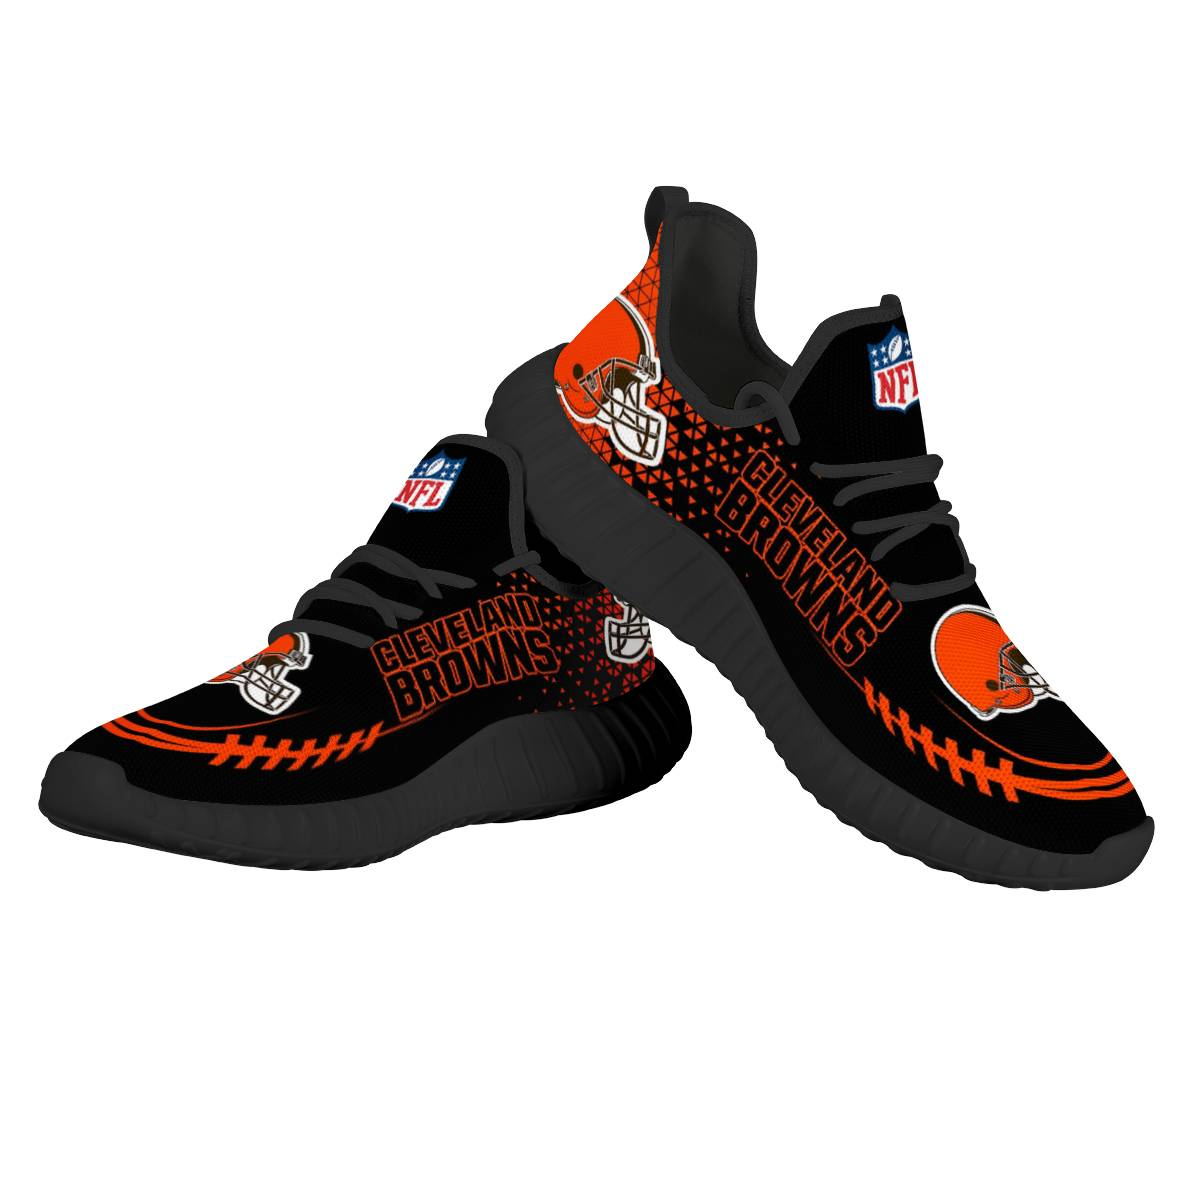 Women's NFL Cleveland Browns Mesh Knit Sneakers/Shoes 003